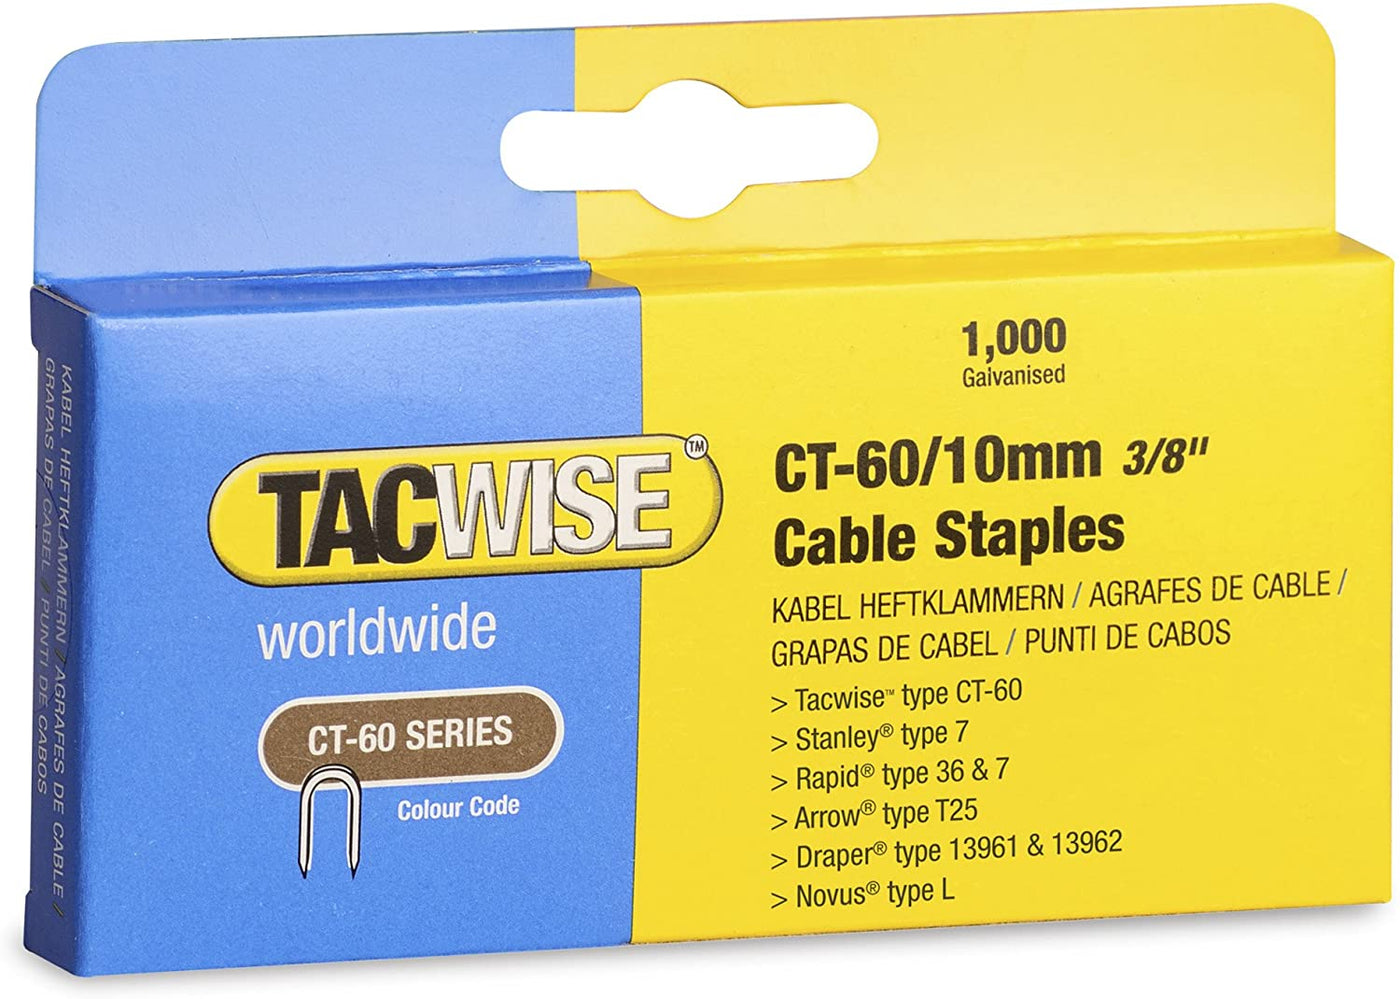 Tacwise 1203 CT-60/10mm Cable Tacker Staples Box of 1000